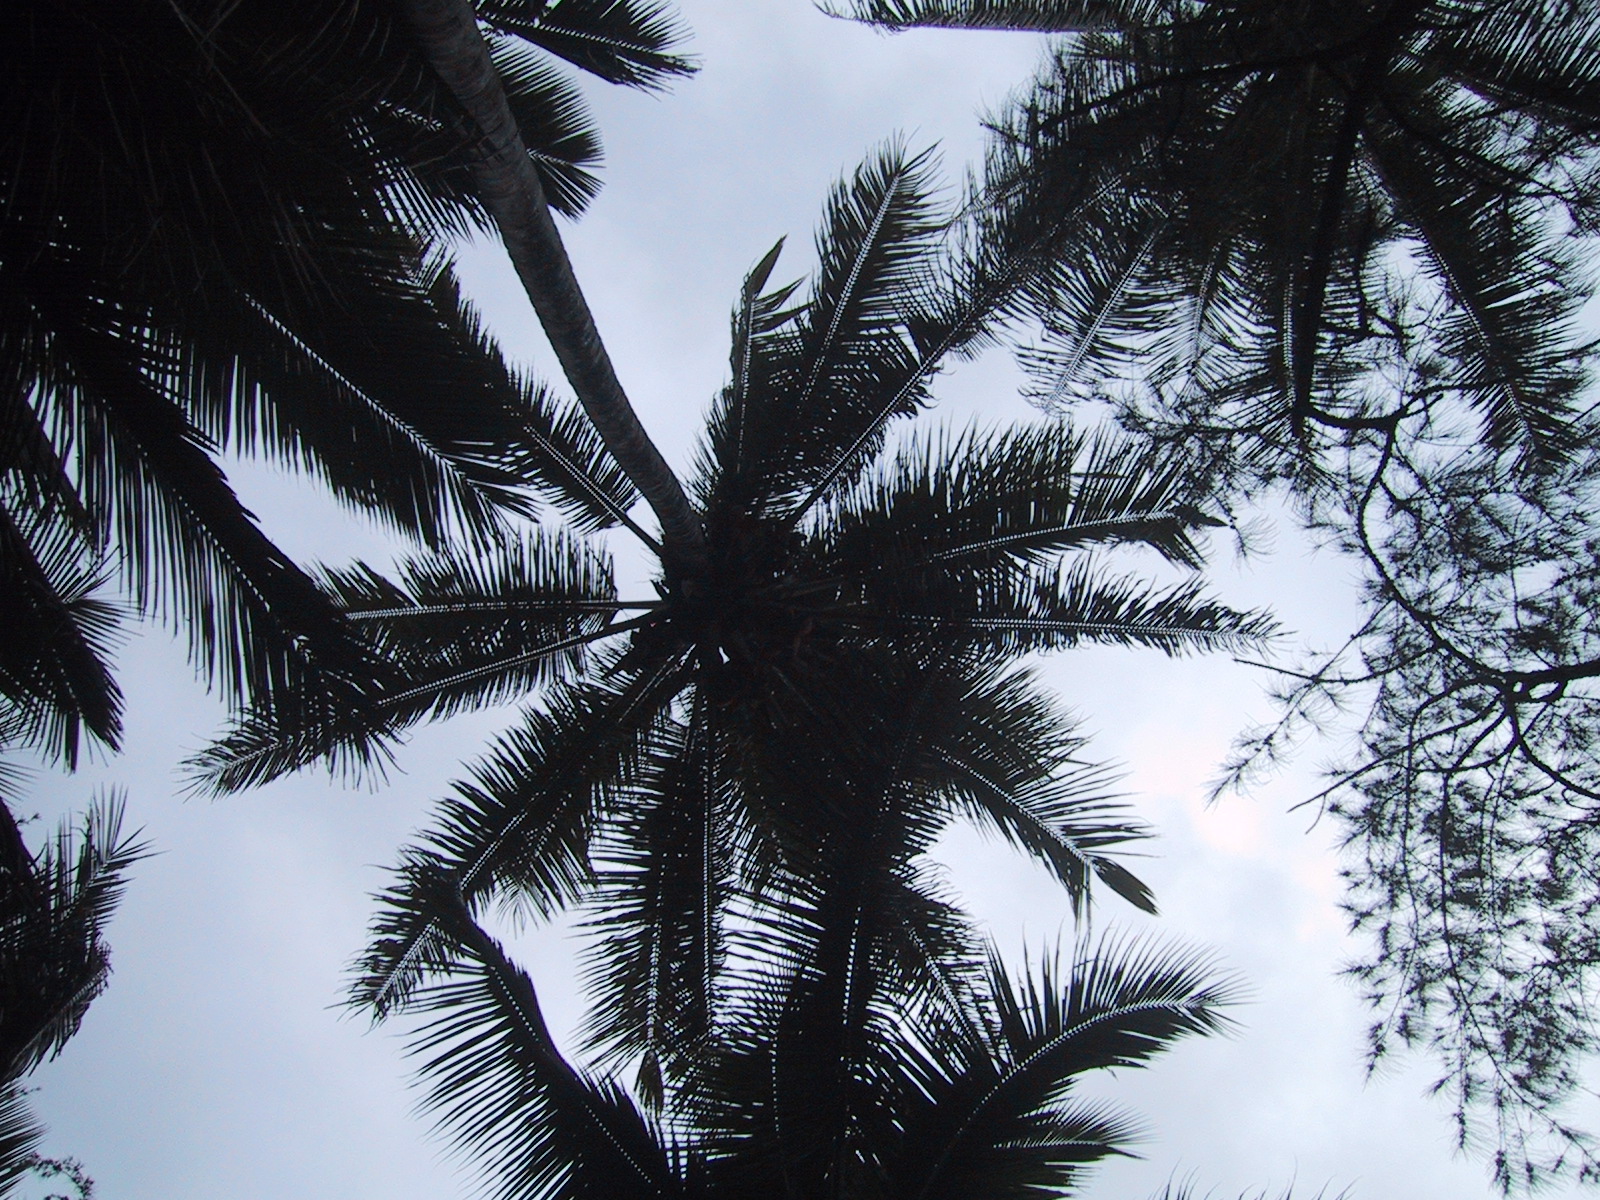 Looking up to the palms